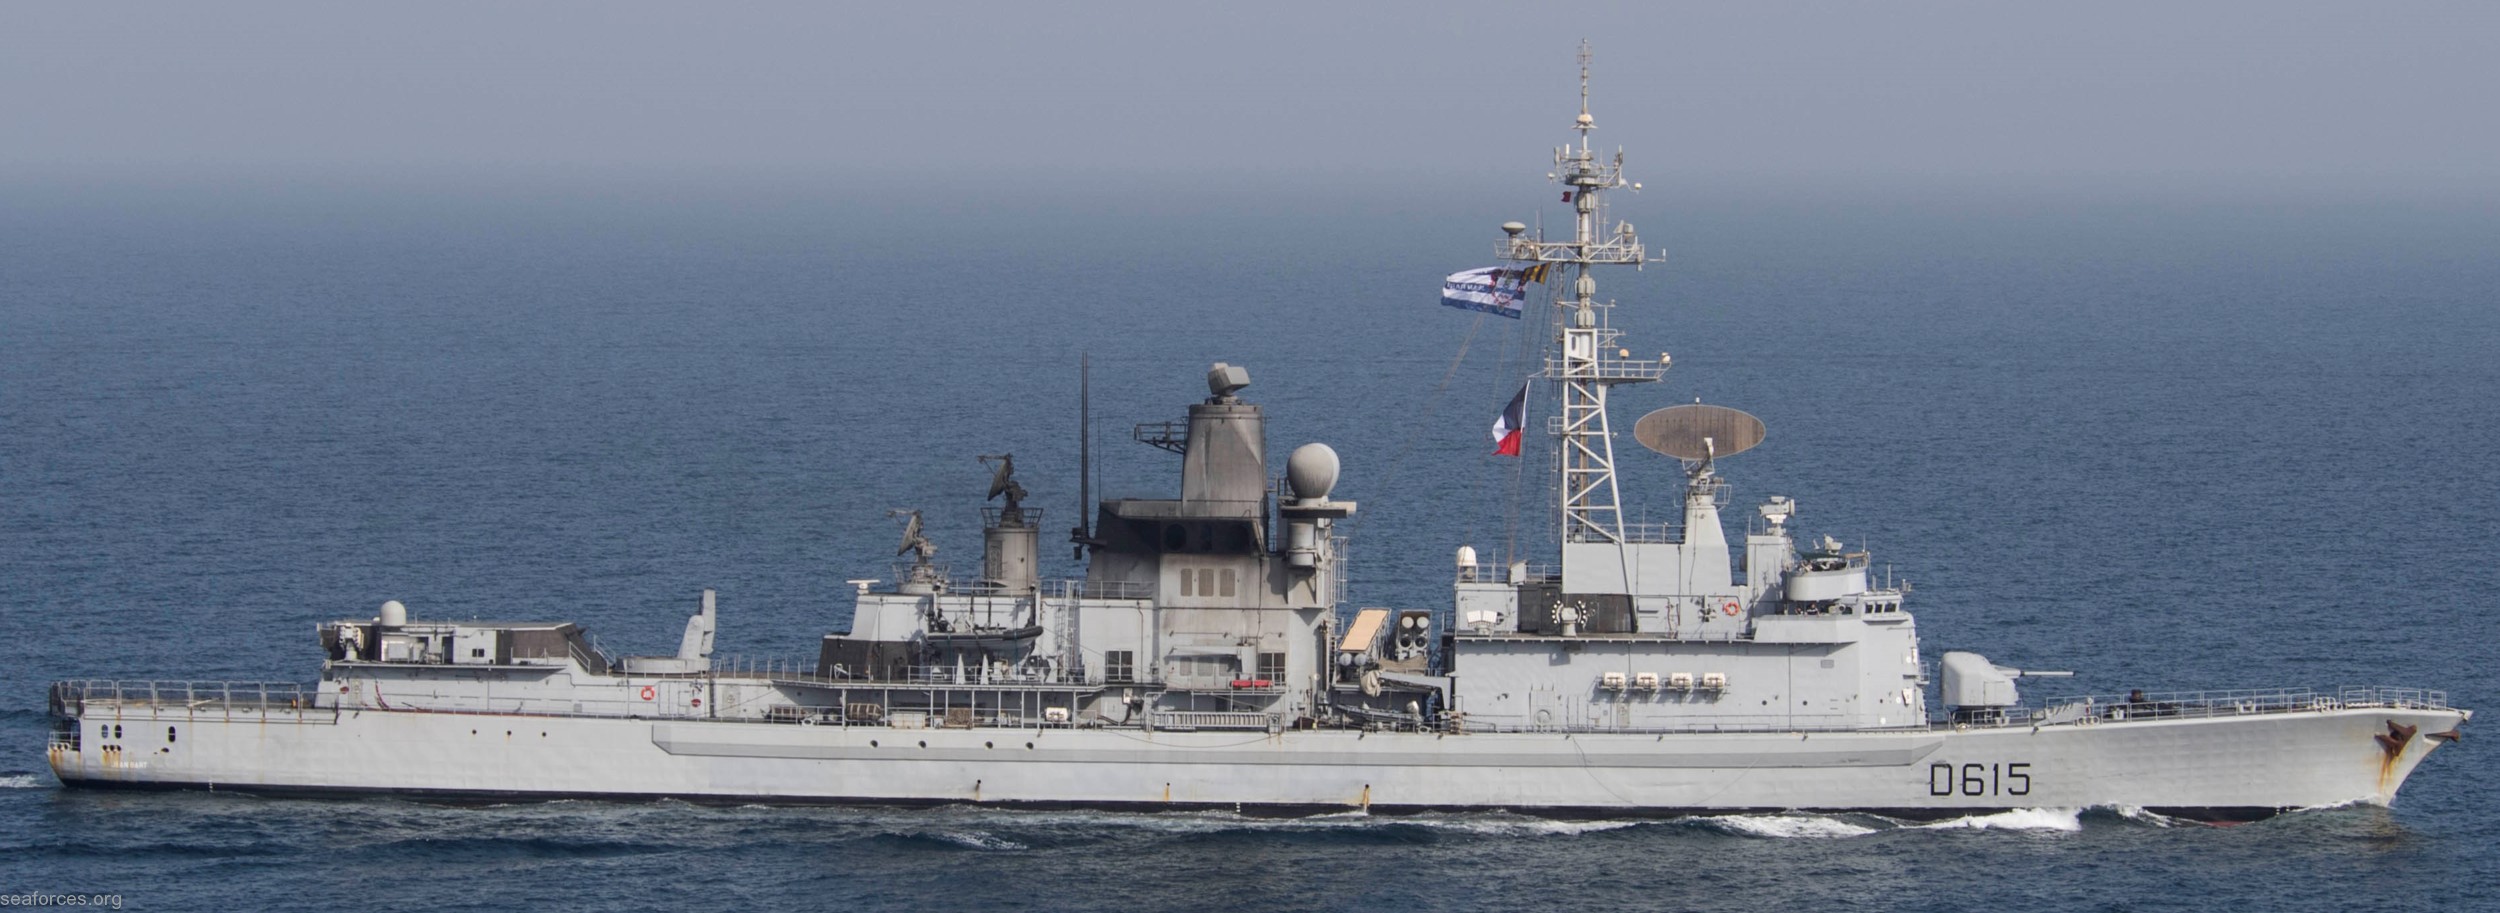 d-615 fs jean bart cassard f70aa class guided missile frigate ffgh ddg french navy marine nationale 02